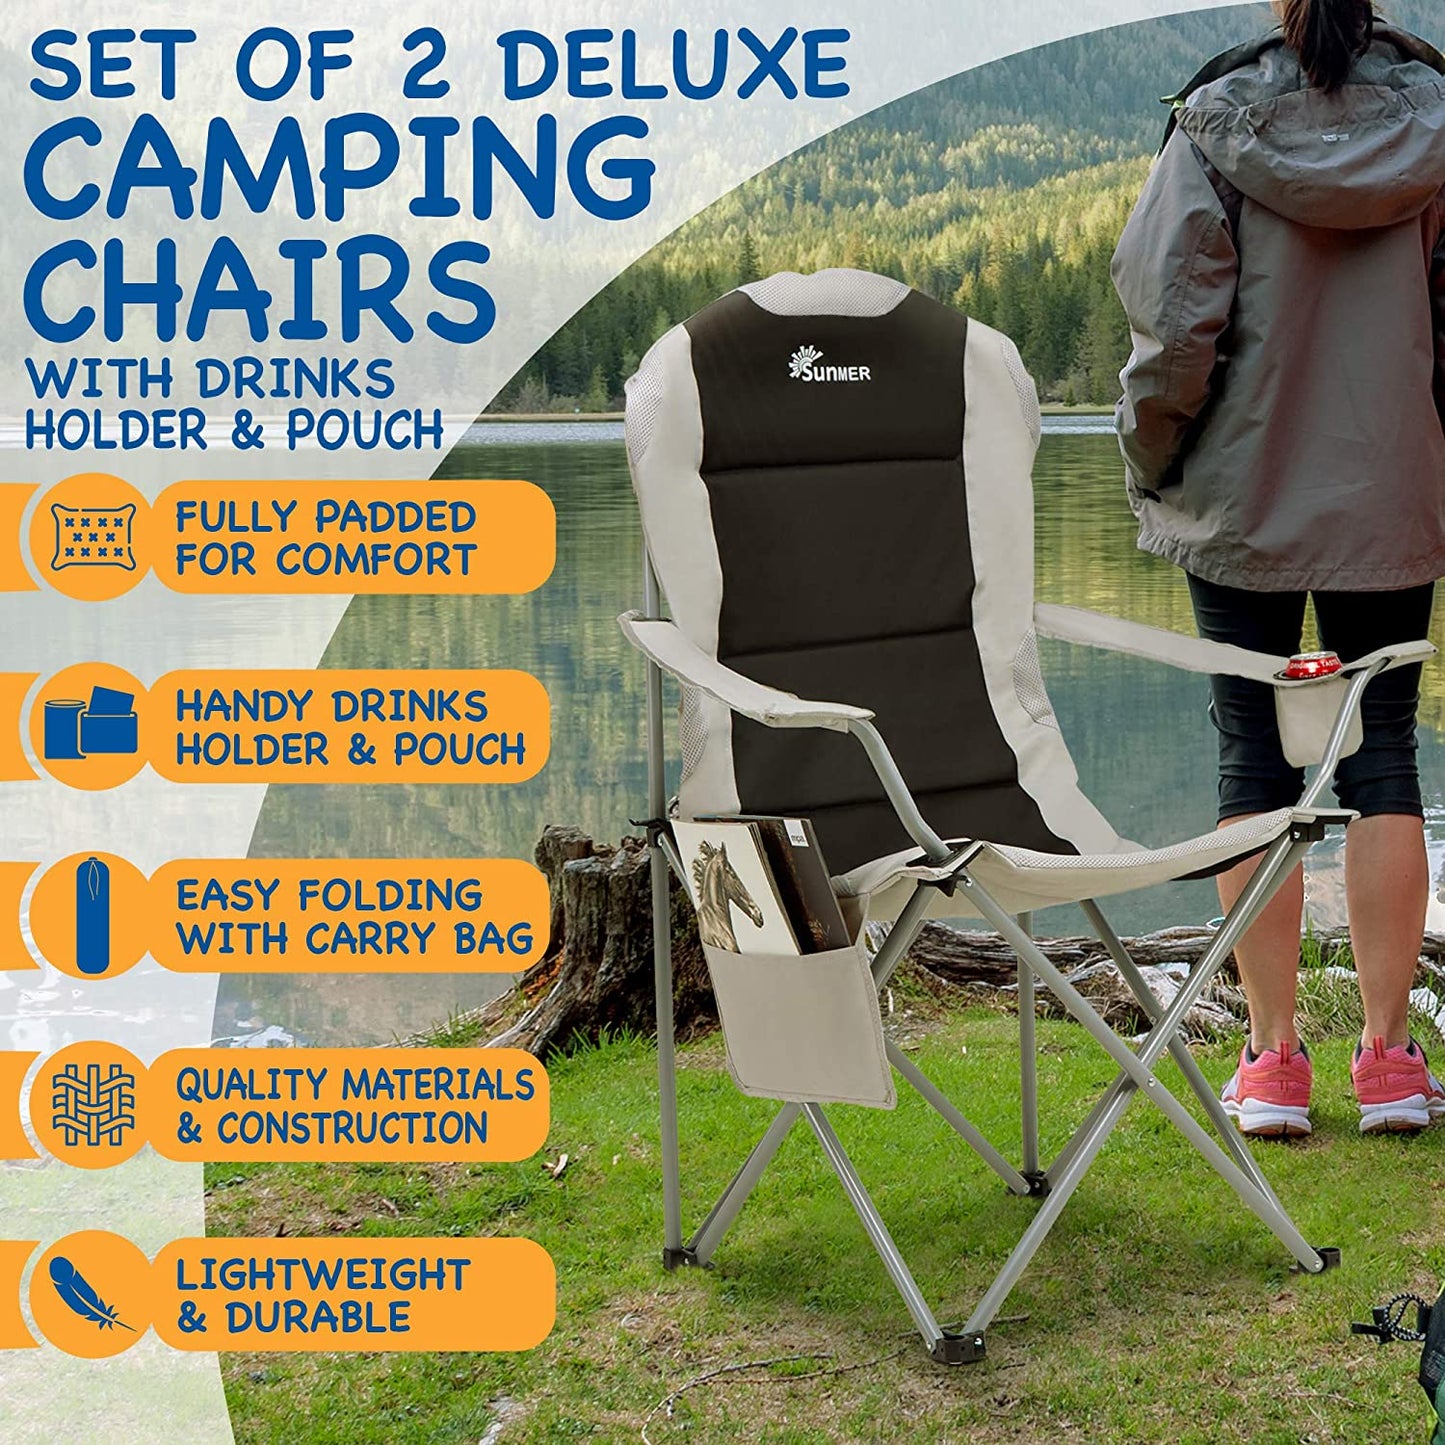 Padded Camping Chairs - Set of 2 Deluxe Folding Chairs with Cup Holder and Side Pockets, Holds up to 120Kg - Lightweight 3.3Kg per Chair - Black & Grey